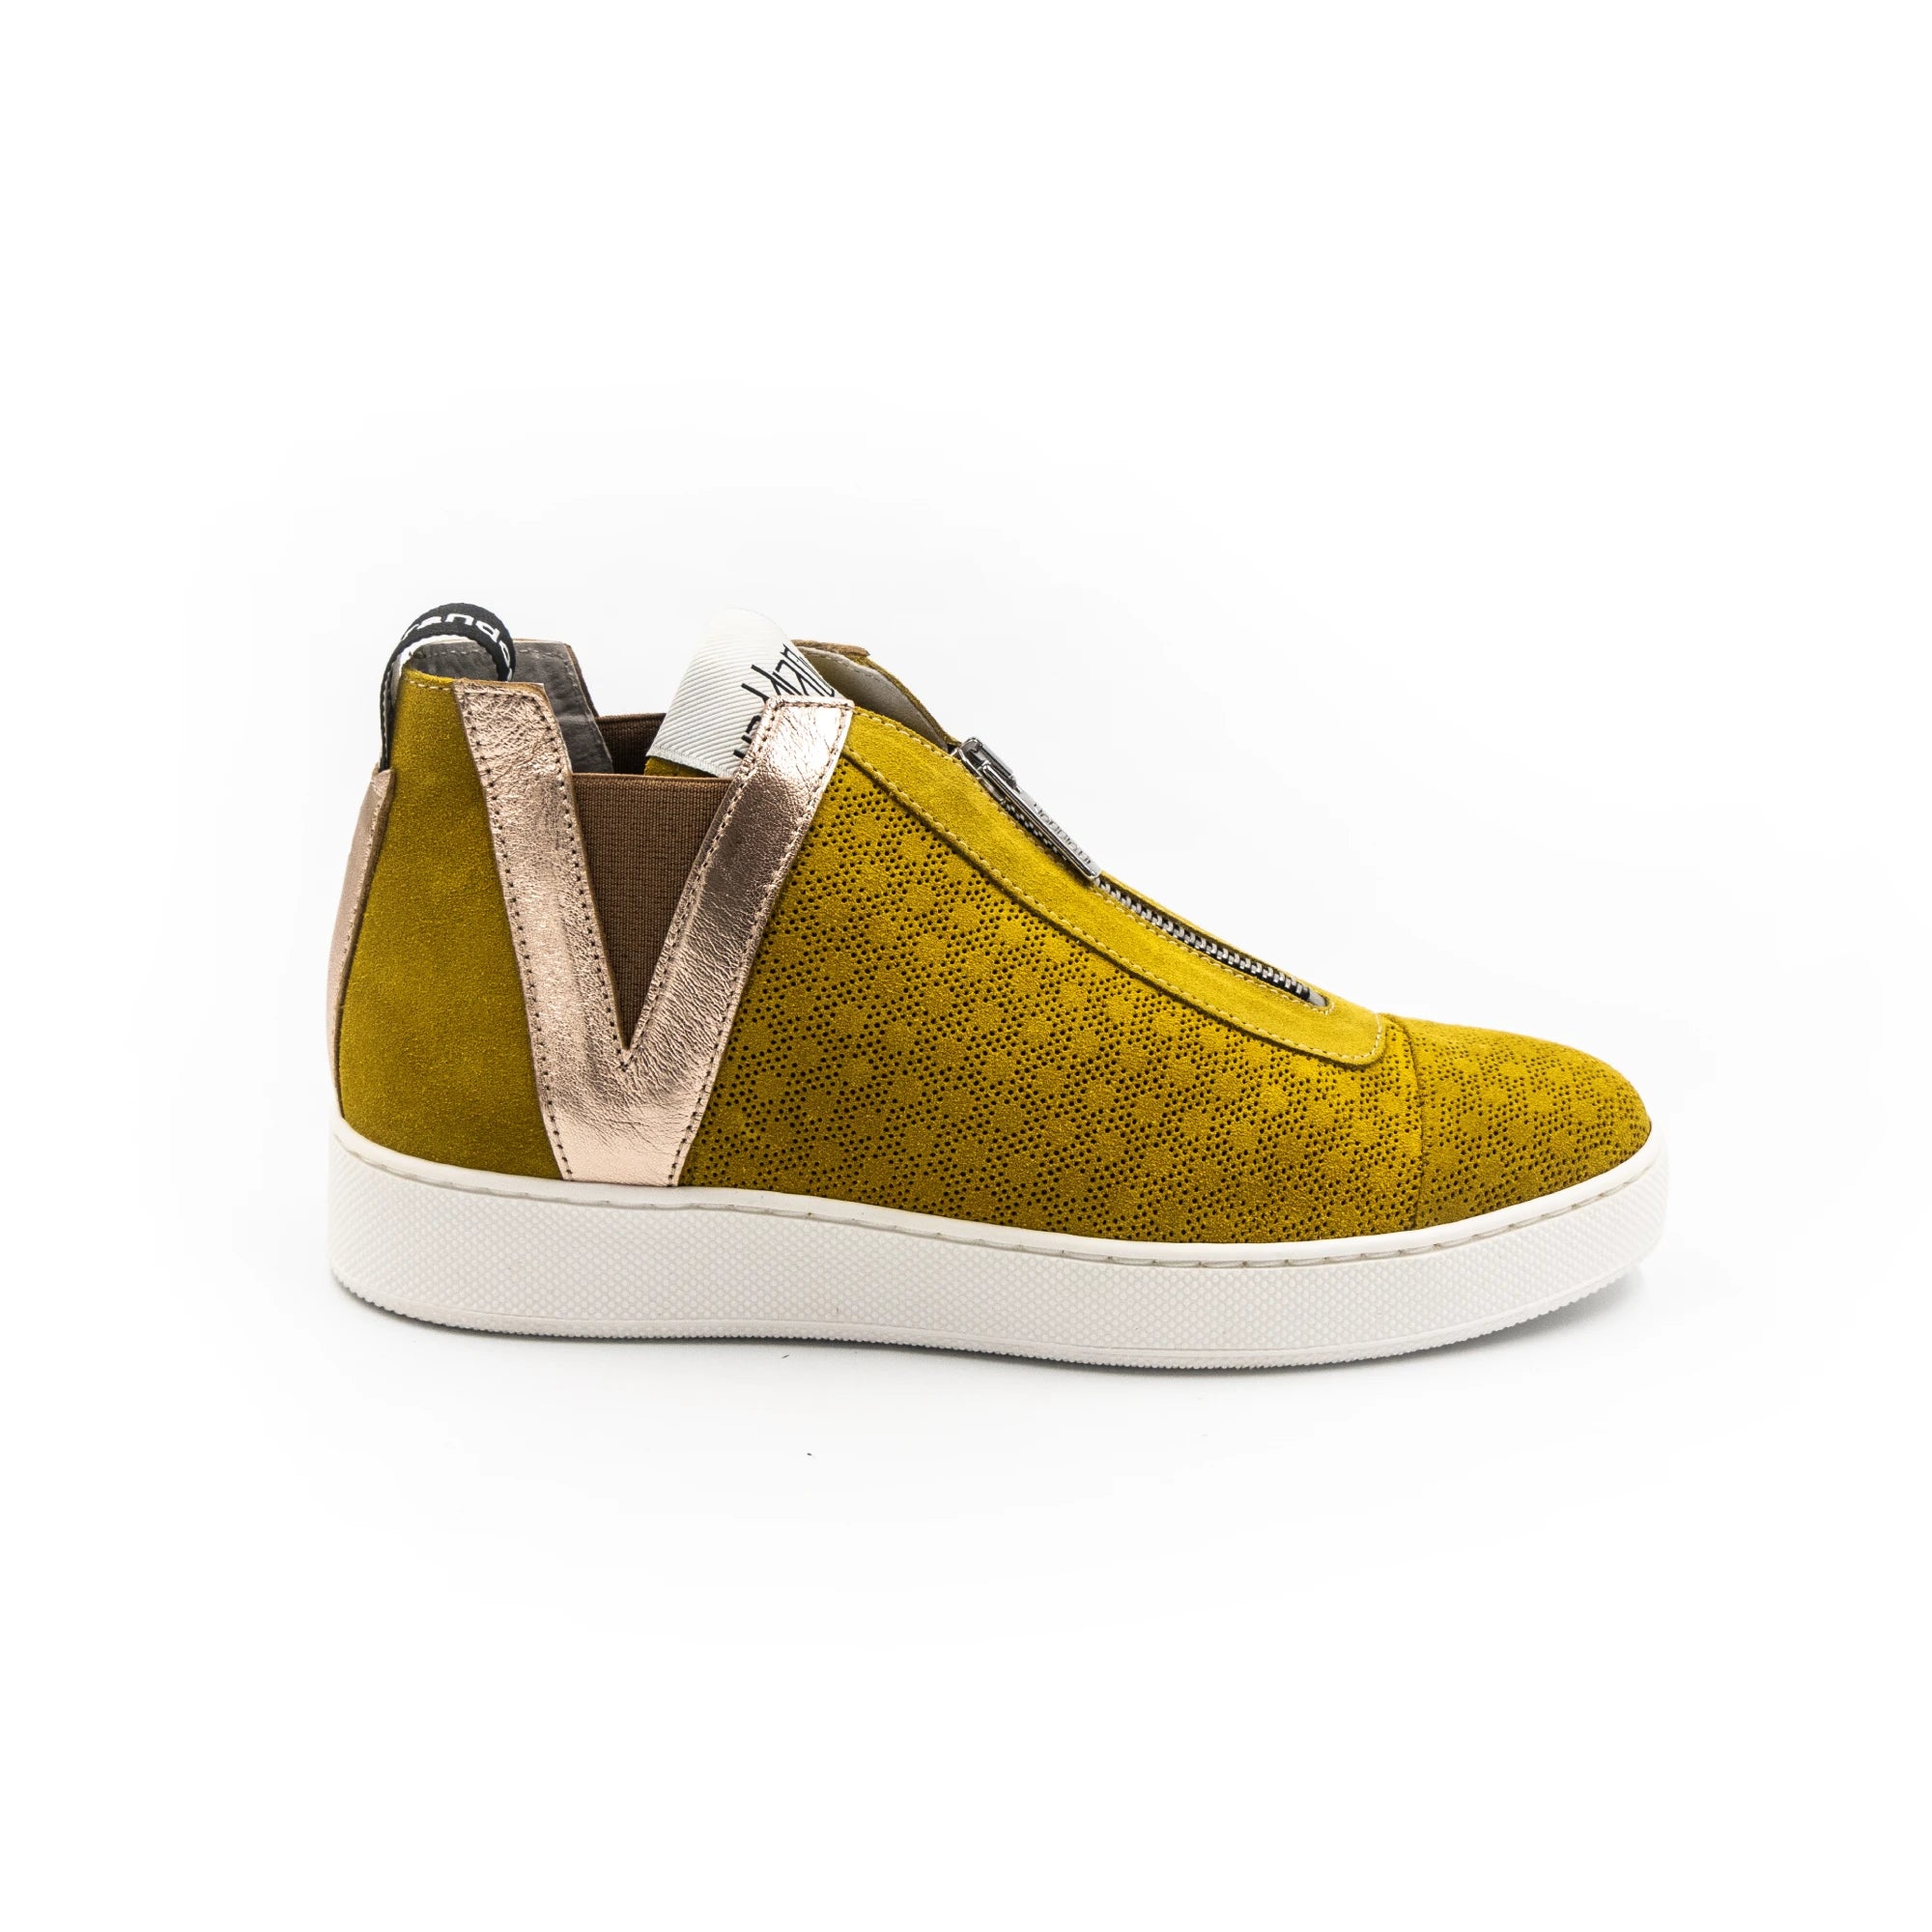 Sneakers with zipper, in yellow.